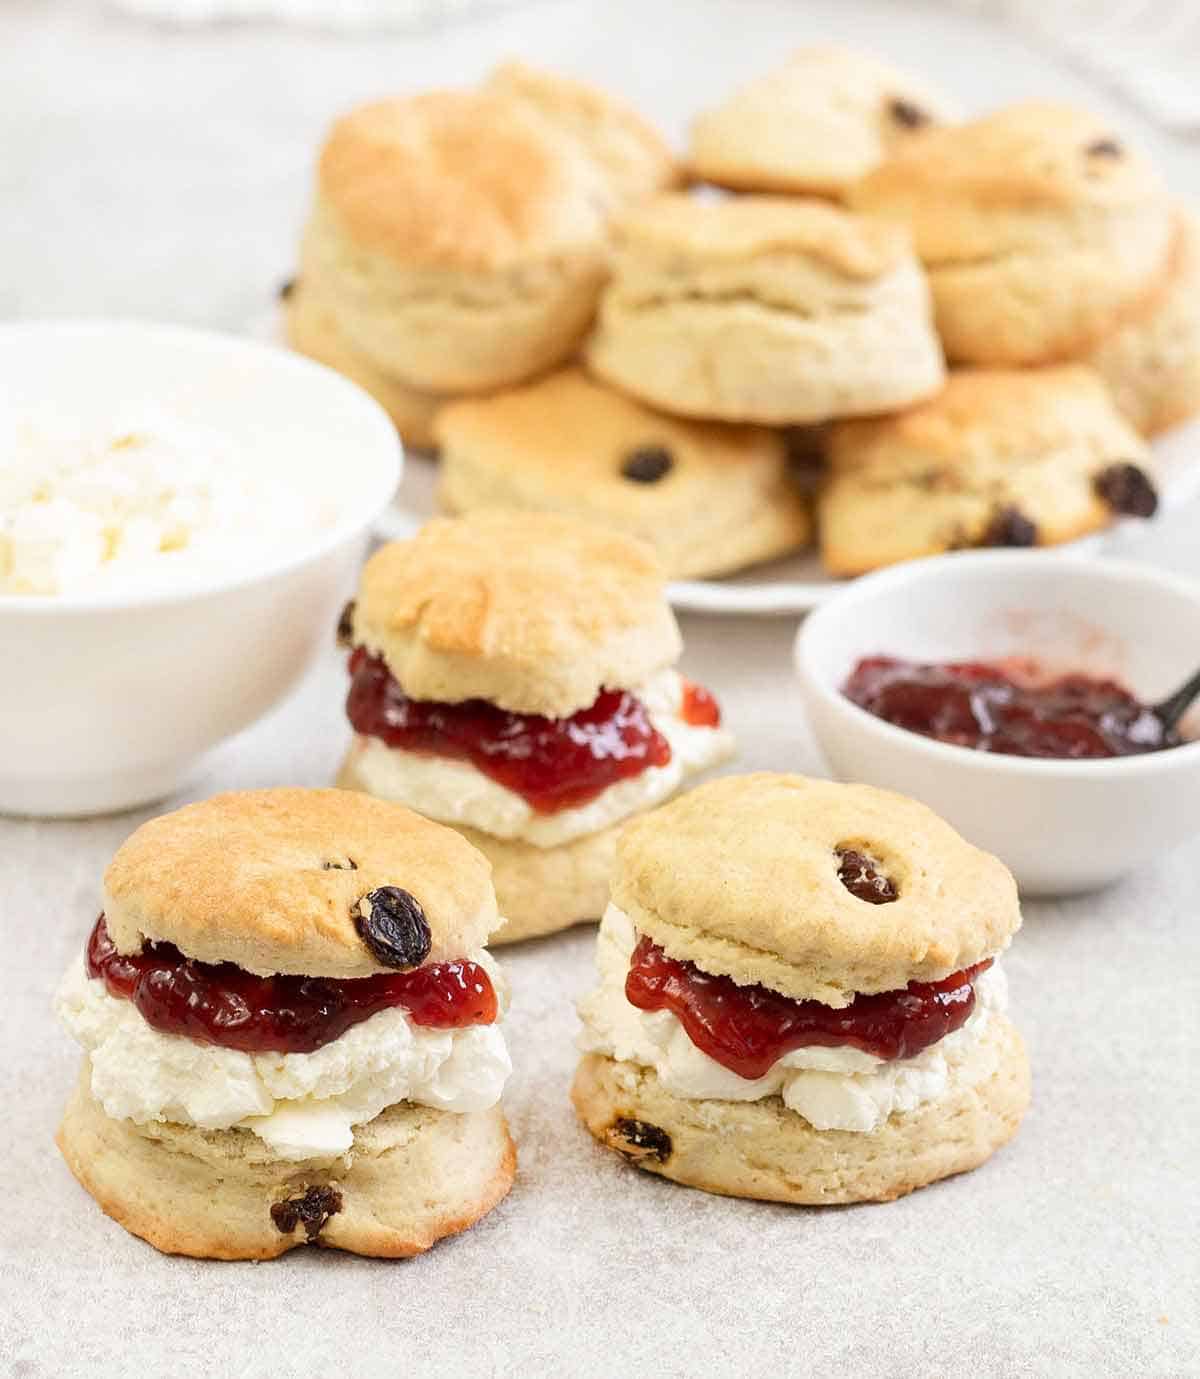 Sultana Scones filled with cream and jam